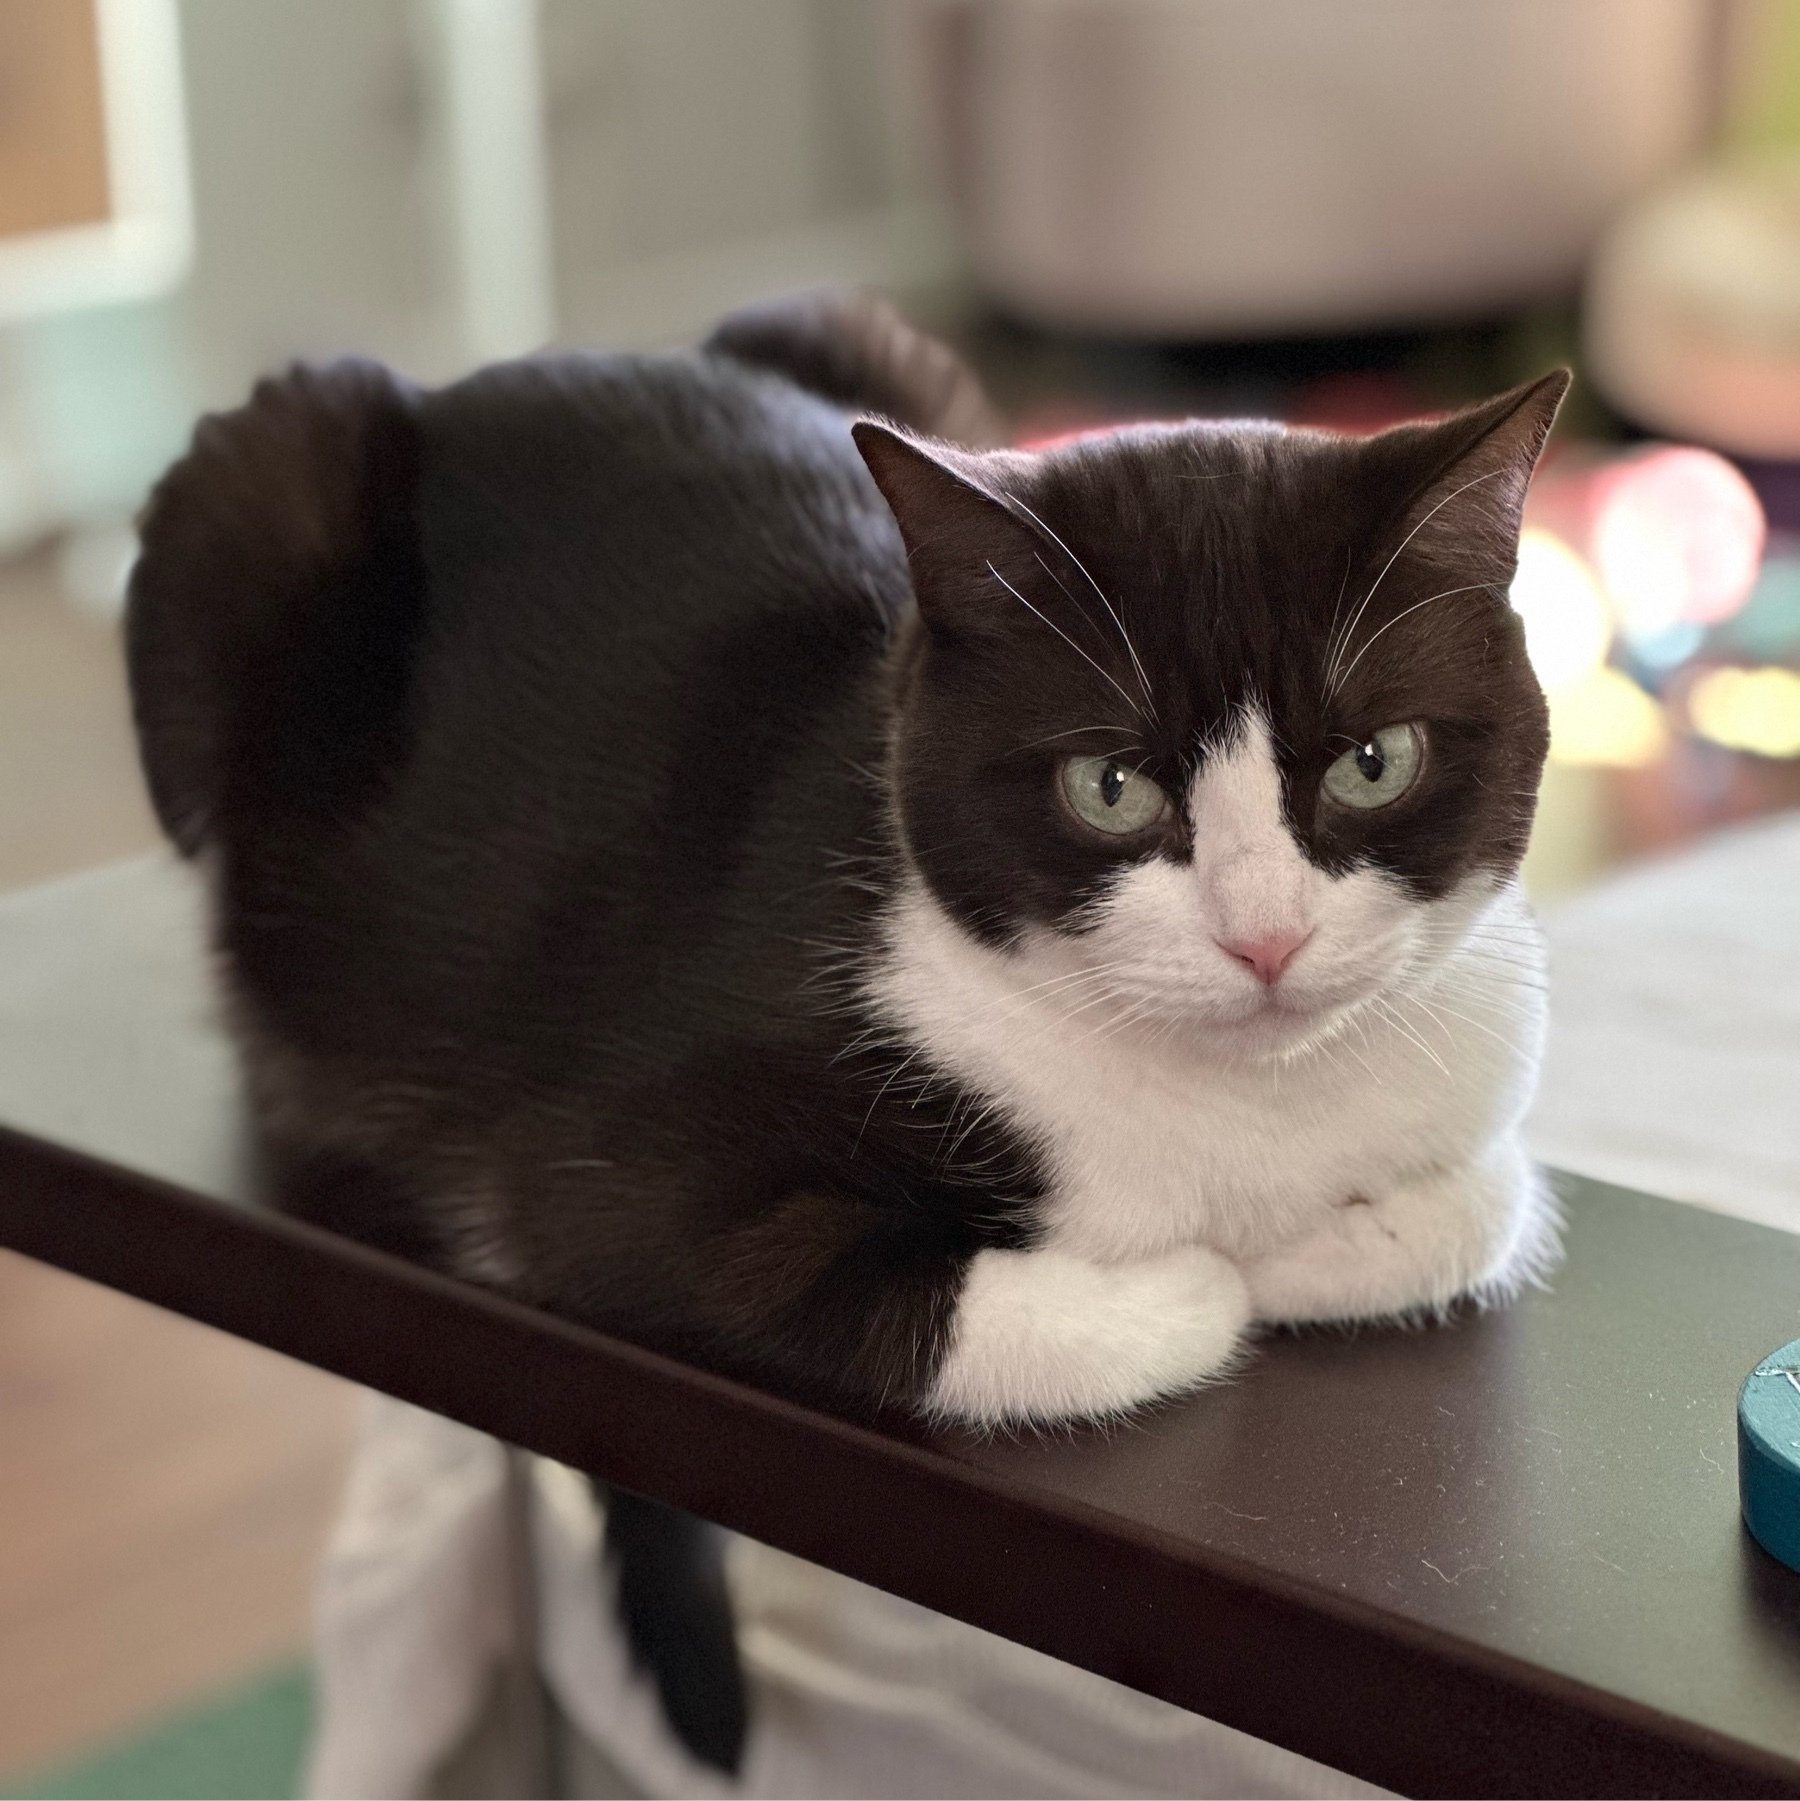 A black and white cat looking at the camera. Her head is black but the nose and jaw are white as is her chest and her front paws, which are tucked under her body. She is sitting in a classic cat loaf pose and the rest of her visible body is black.